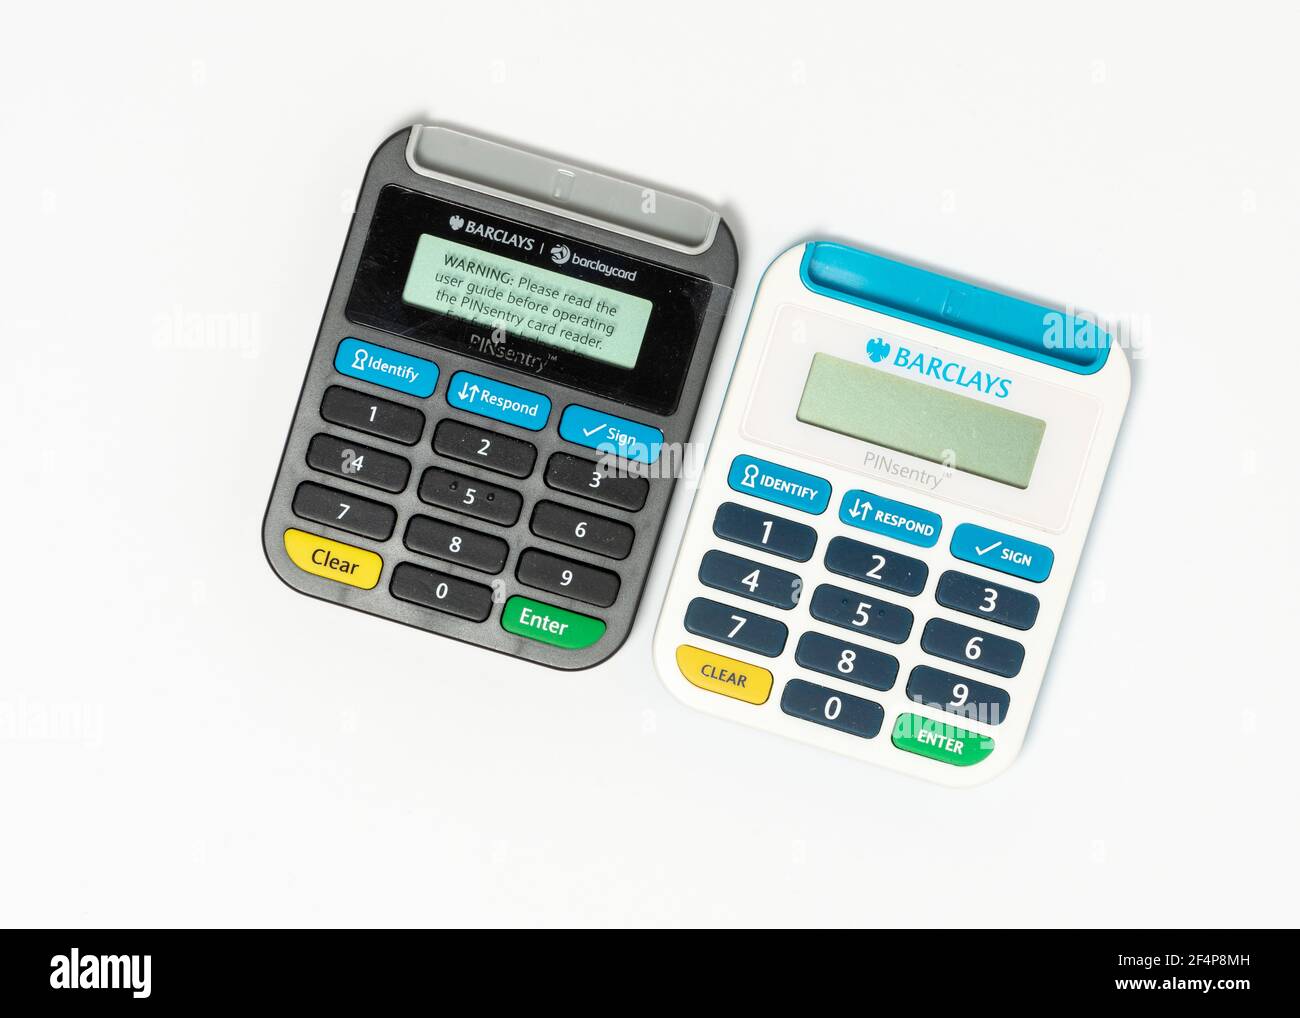 Old and new Barclays Pinsentry card reader devices Stock Photo